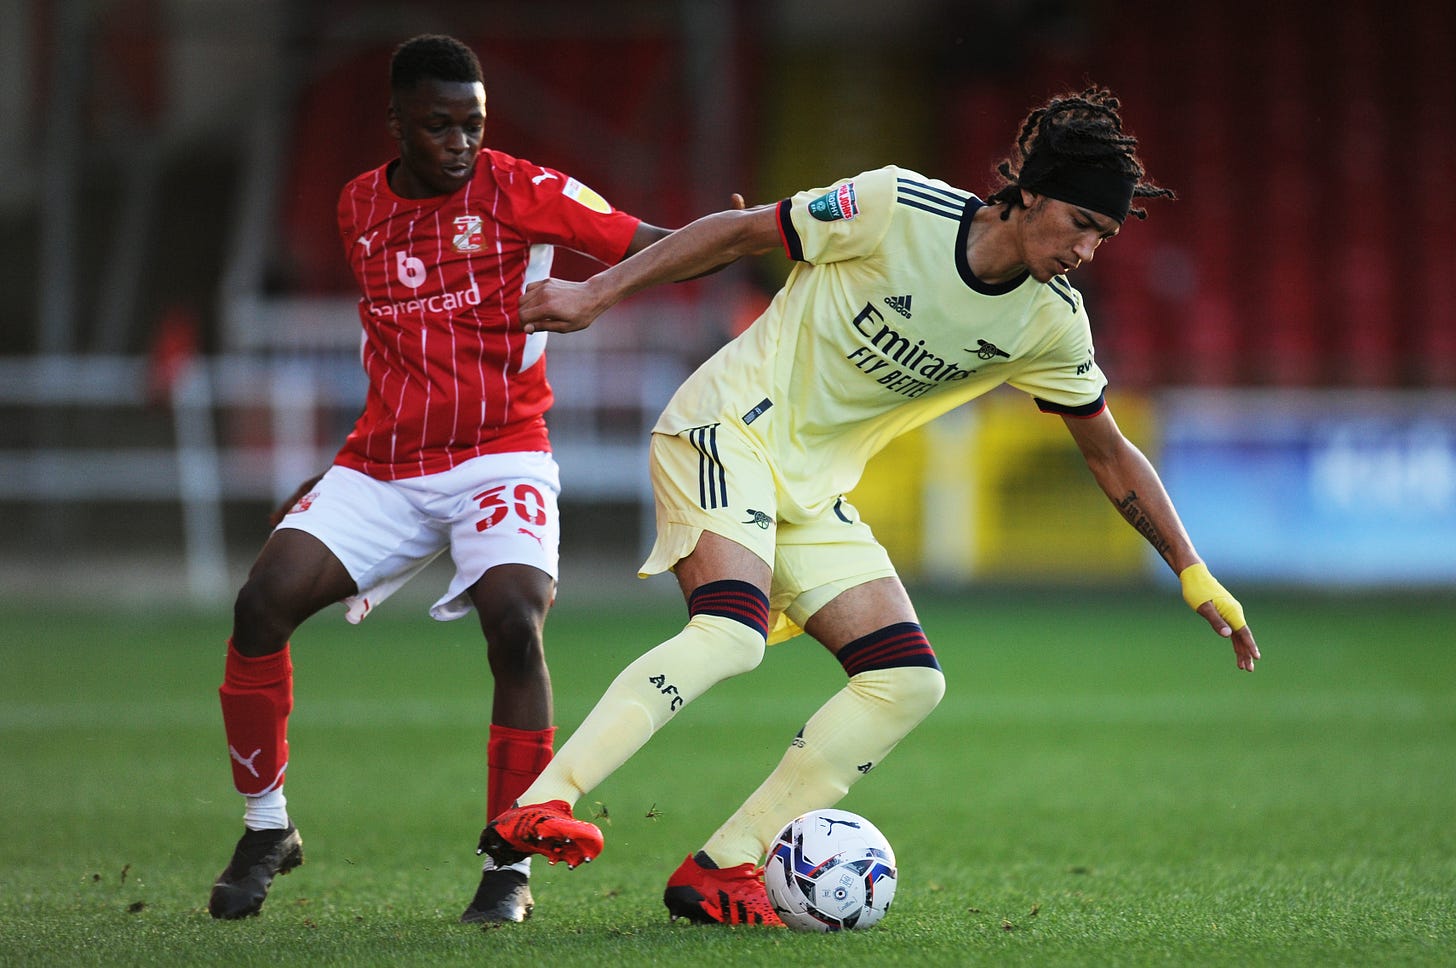 Kido Taylor-Hart pictured (right) playing for Arsenal U21 against Swindon Town in the EFL Trophy in September 2021